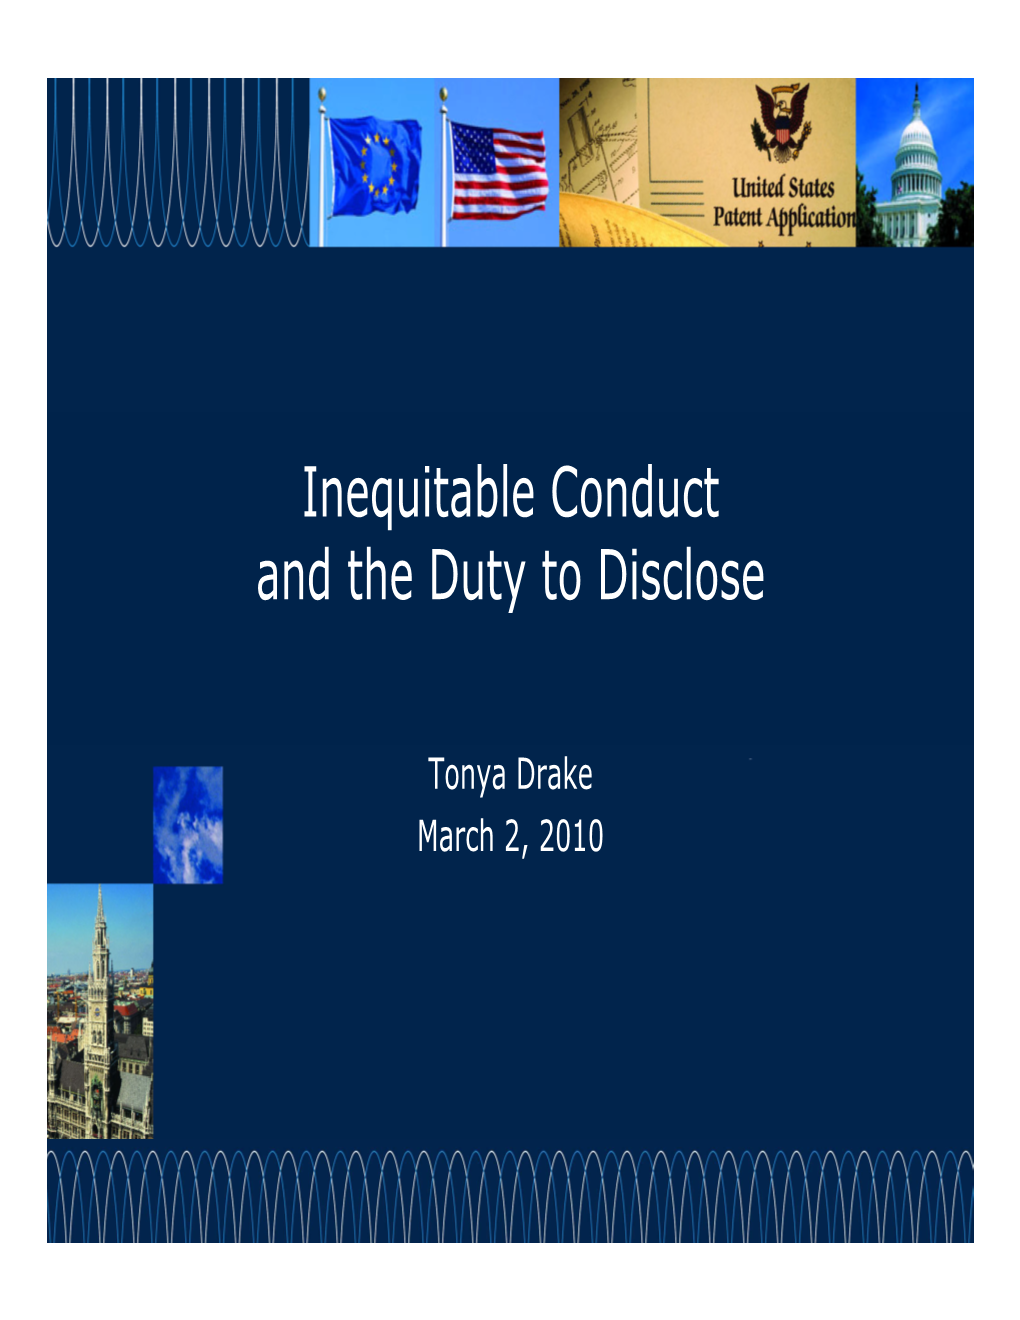 Inequitable Conduct and the Duty to Disclose